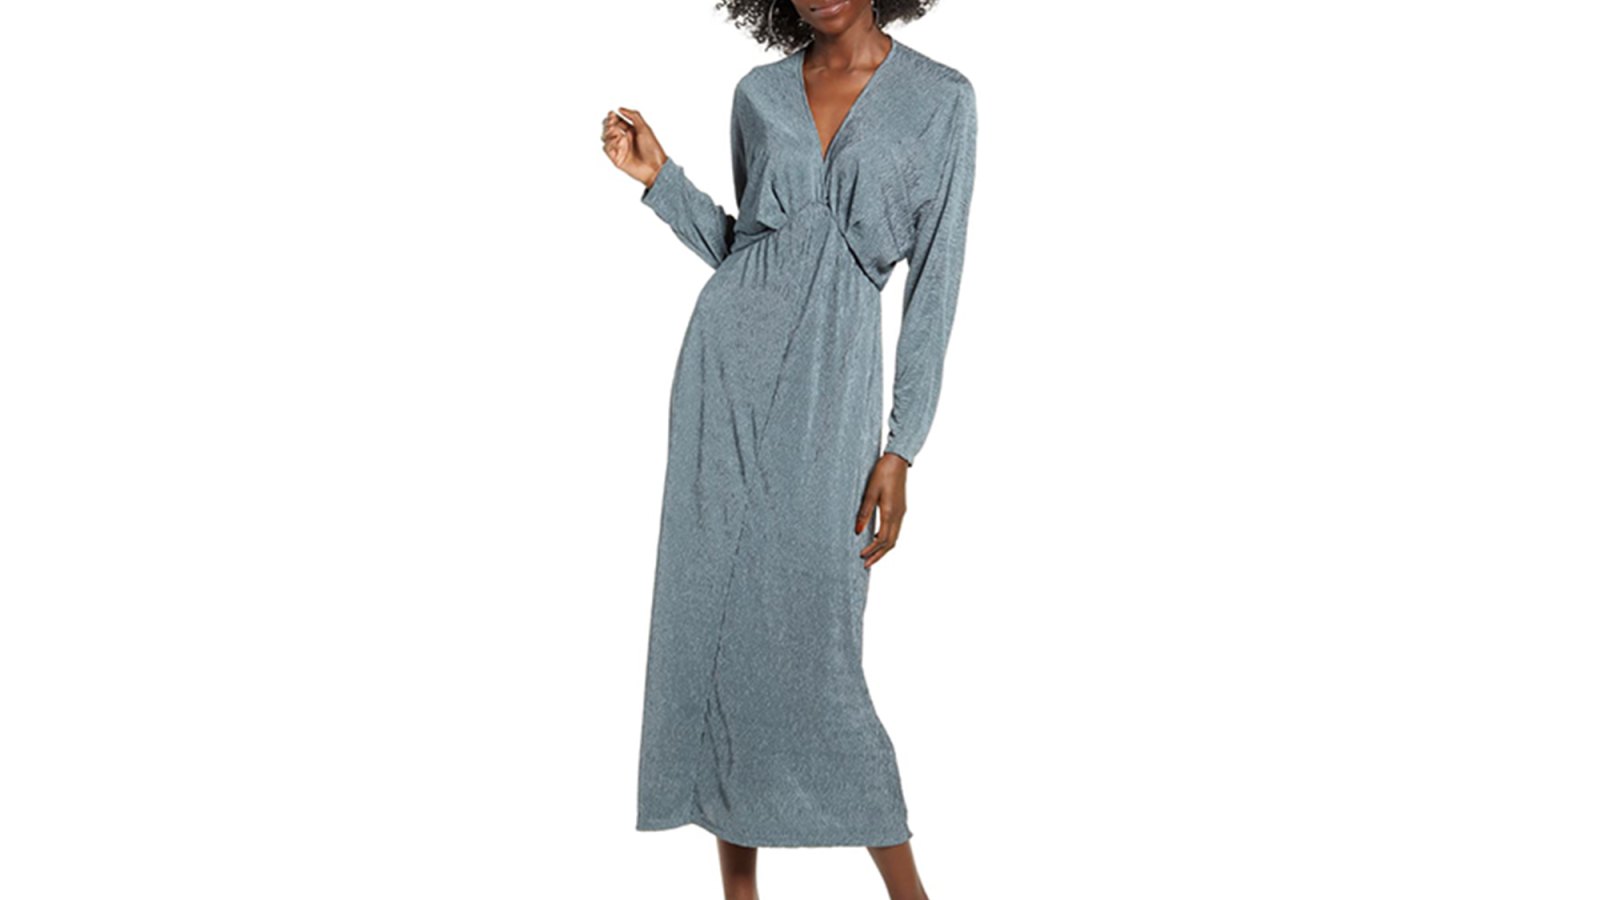 All in Favor Textured Long Sleeve Dress